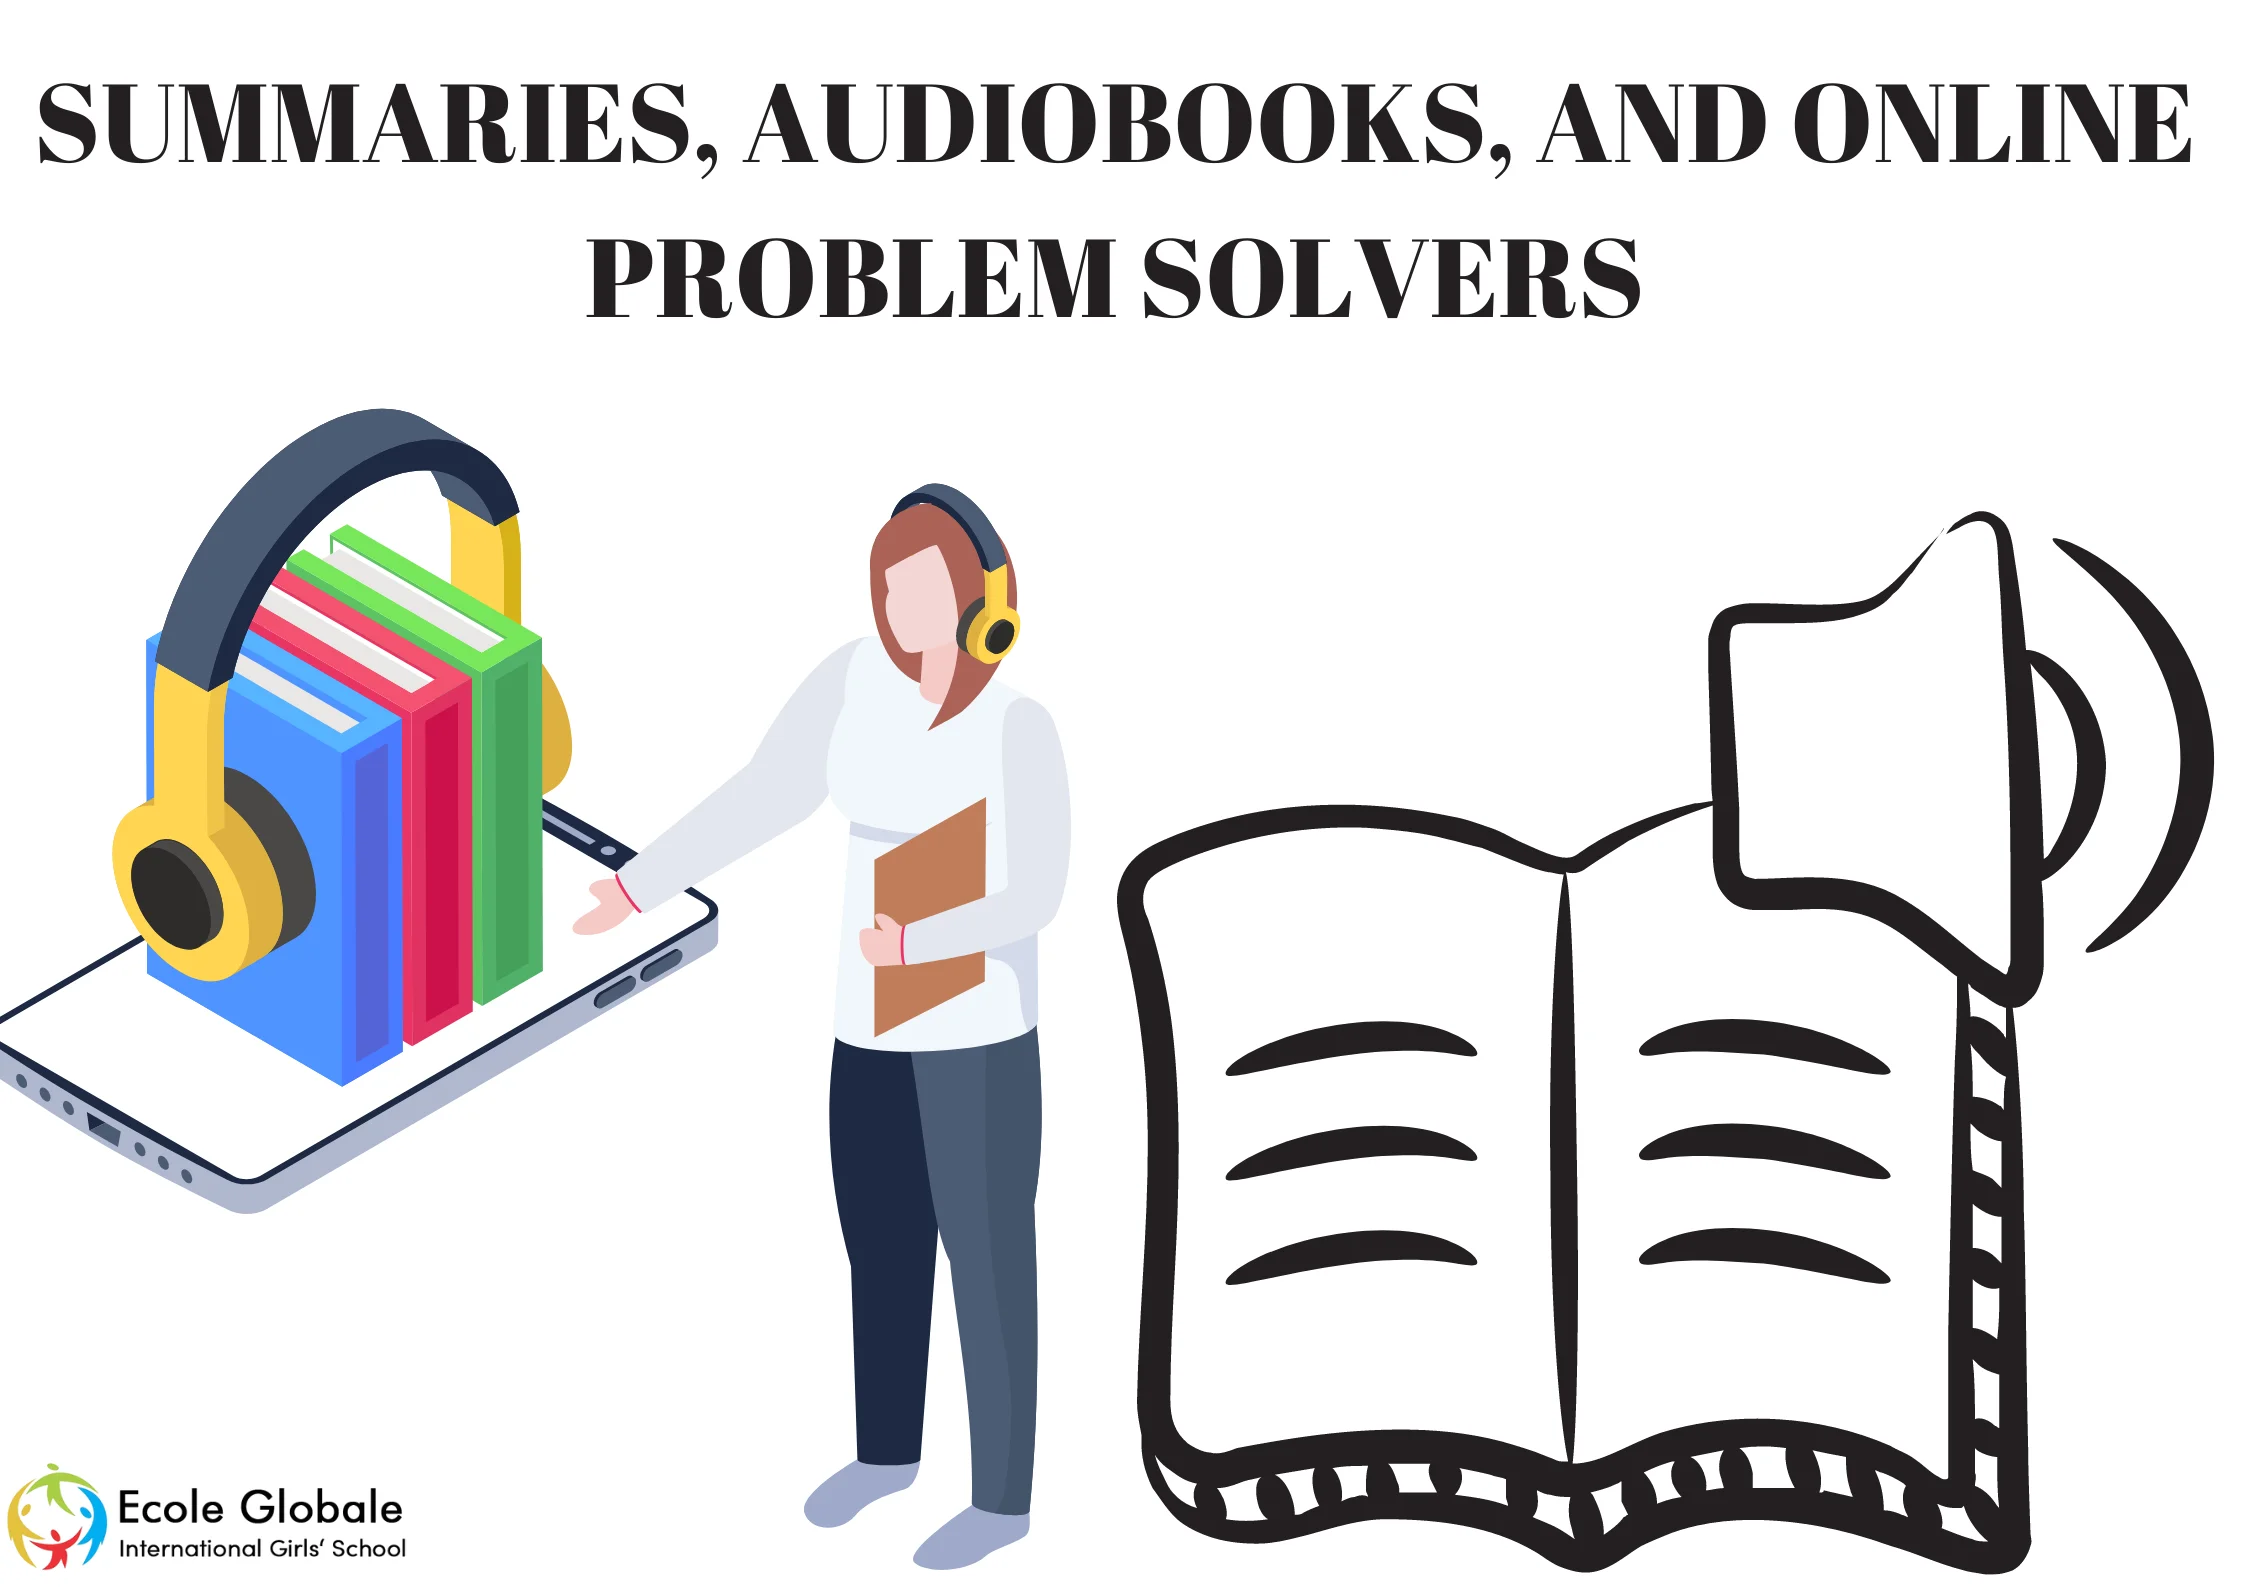 You are currently viewing SUMMARIES, AUDIOBOOKS, AND ONLINE PROBLEM SOLVERS